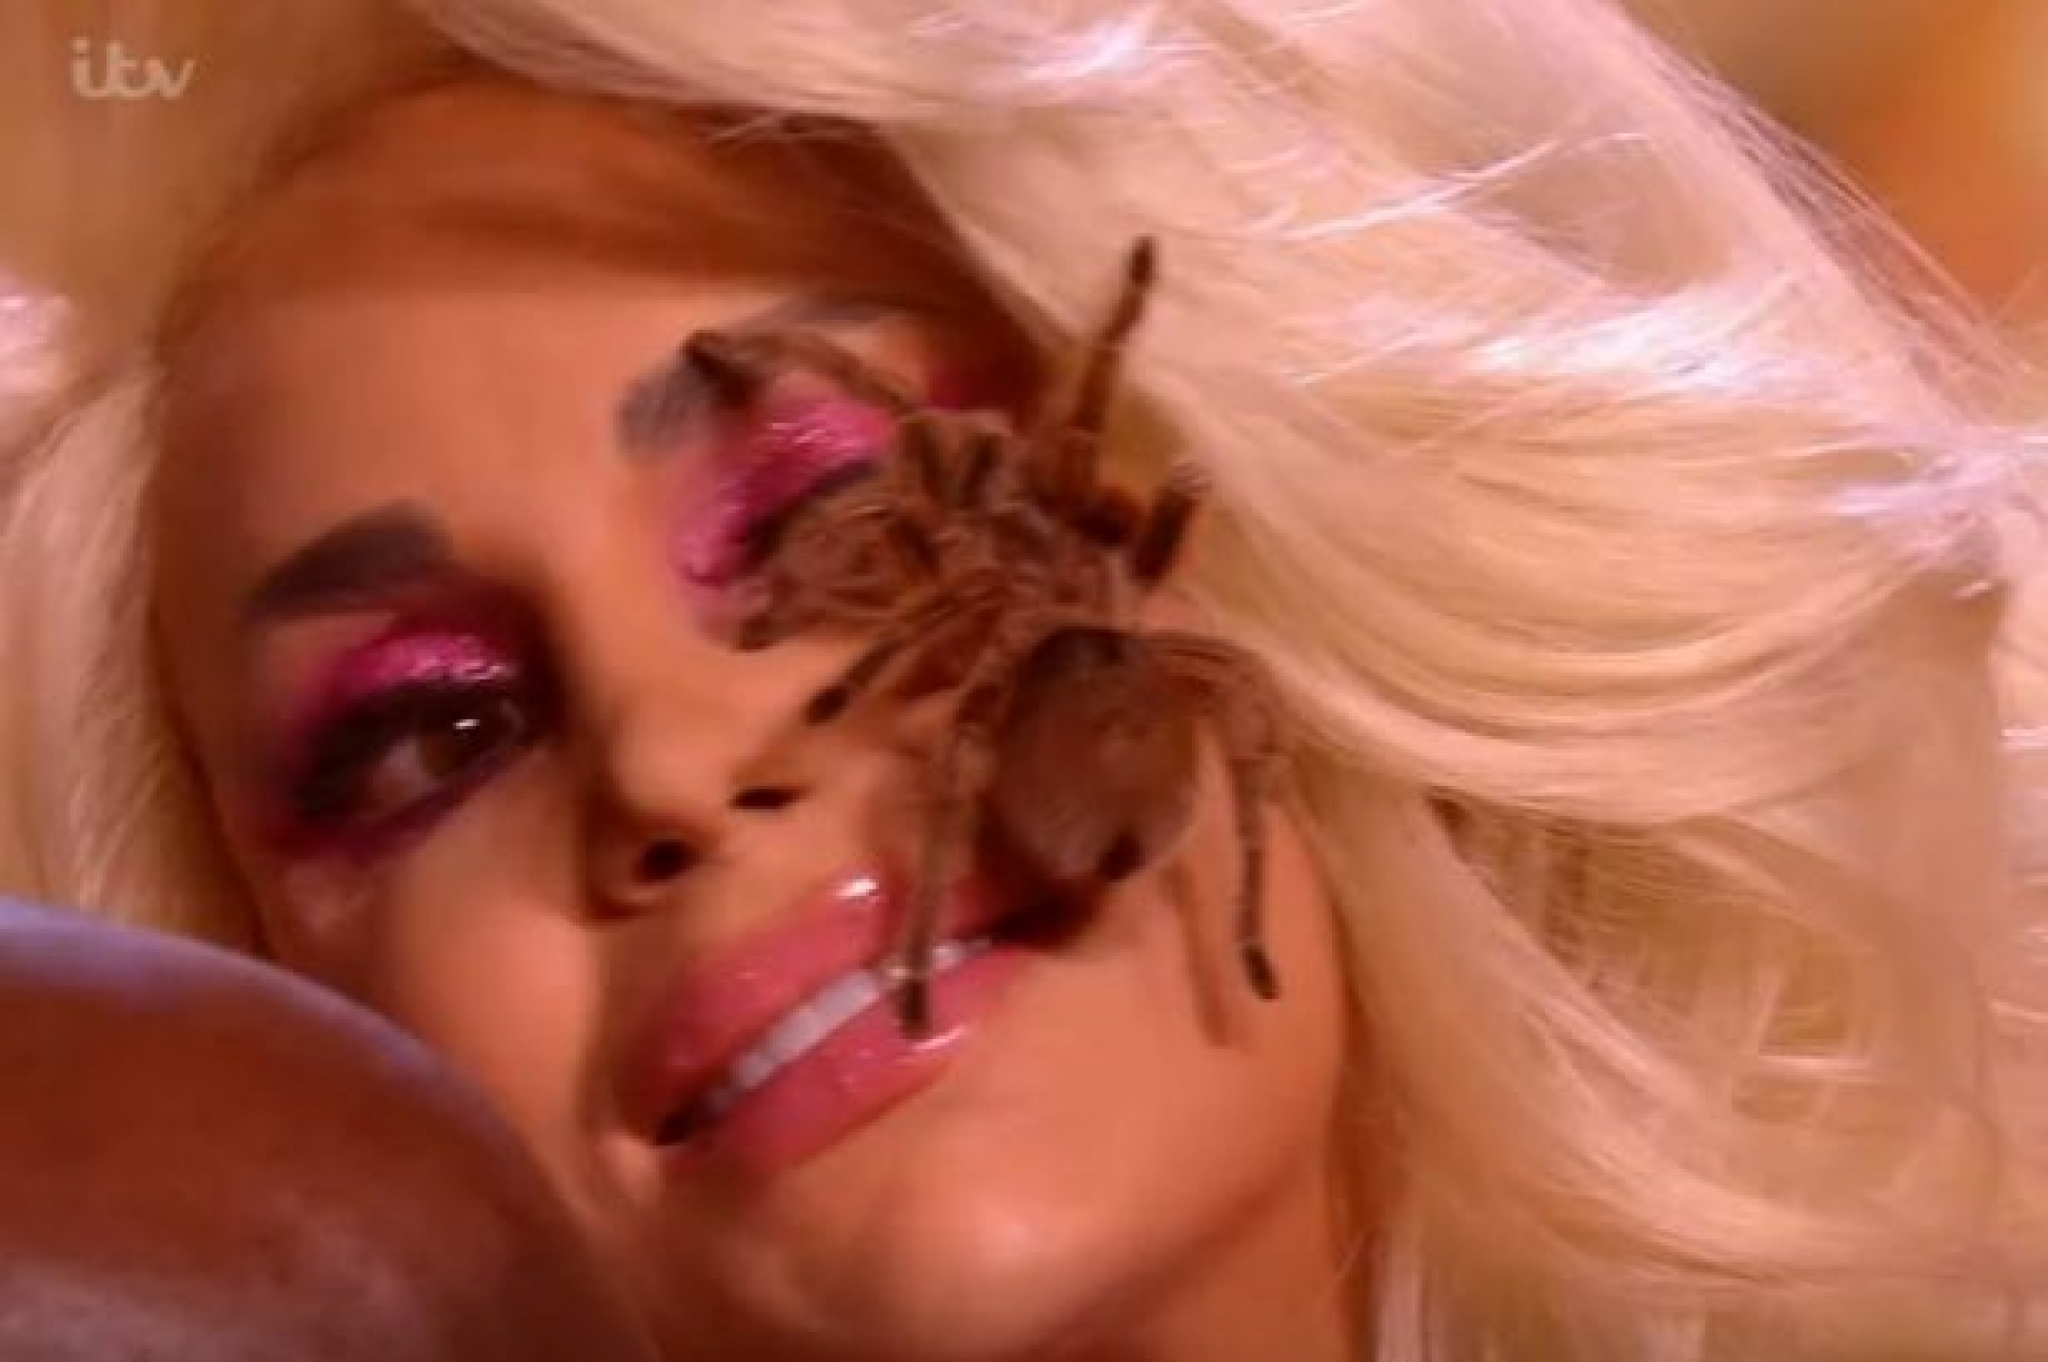 Game of Talents fans ‘traumatised’ as woman performs with tarantulas on her face